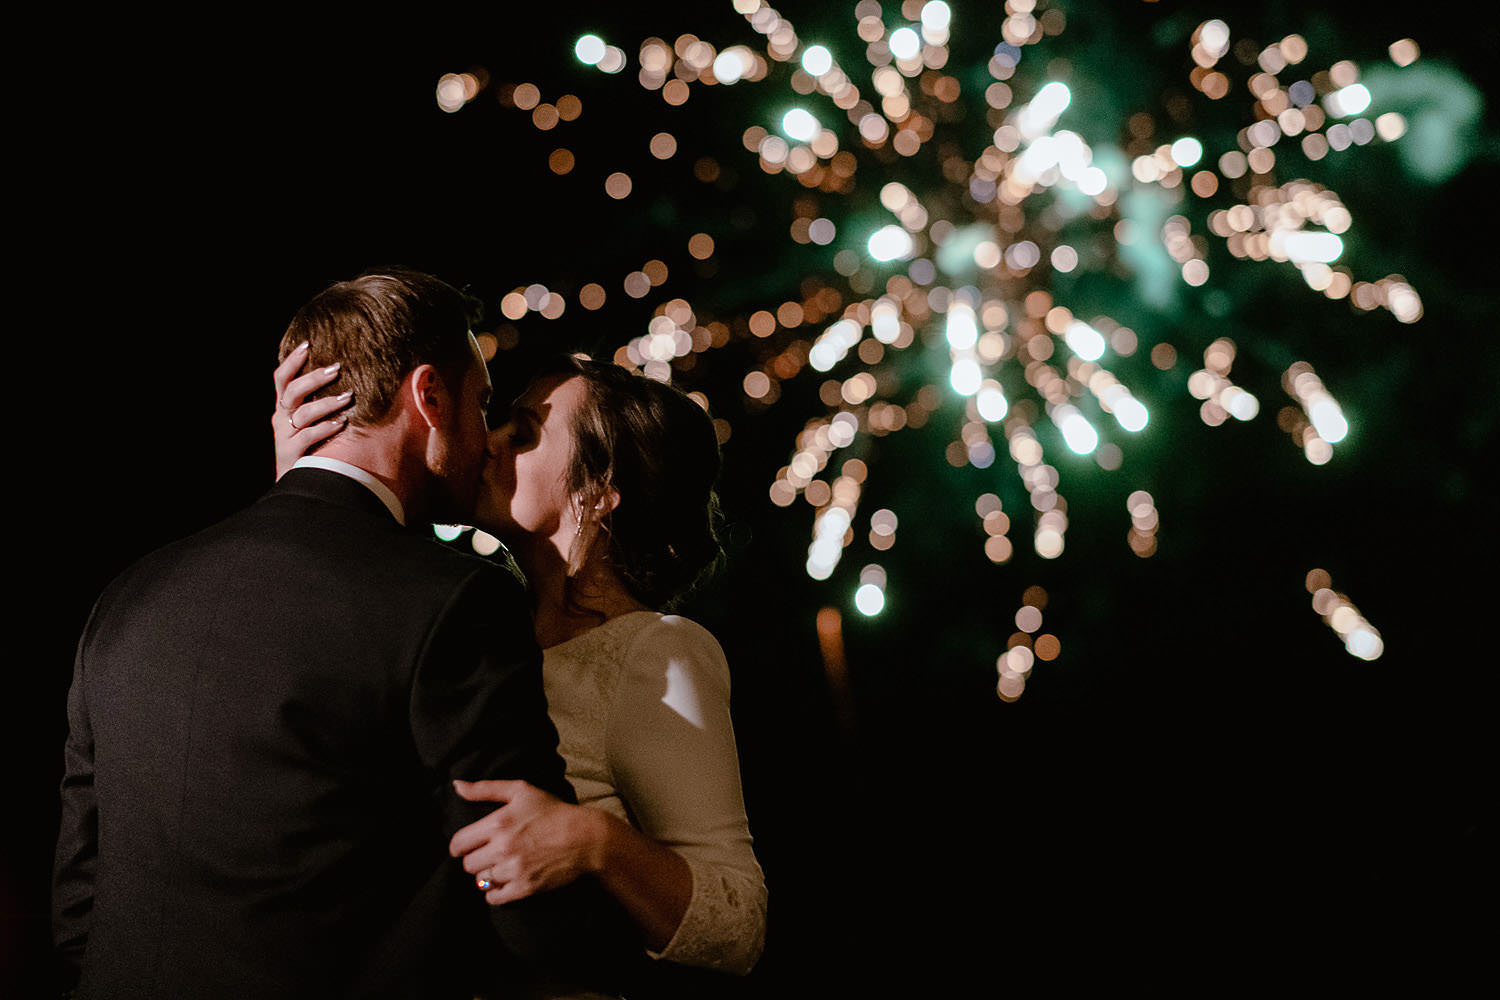 relaxing countryside wedding in tuscany bride groom celebrating with fireworks